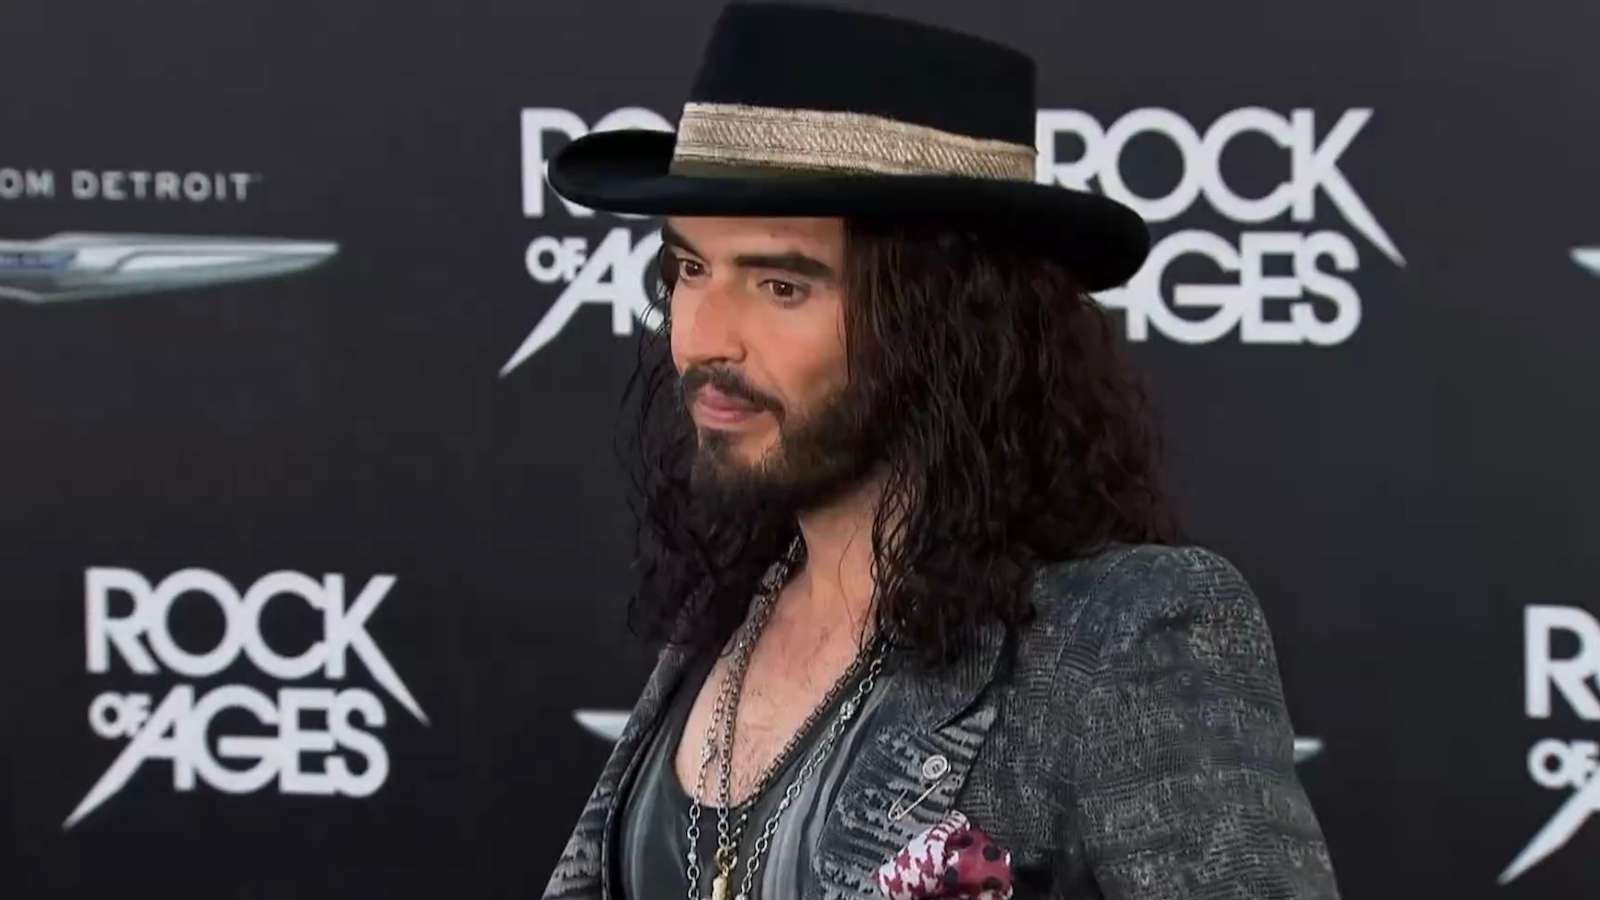 Russell Brand at the Rock of Ages premiere